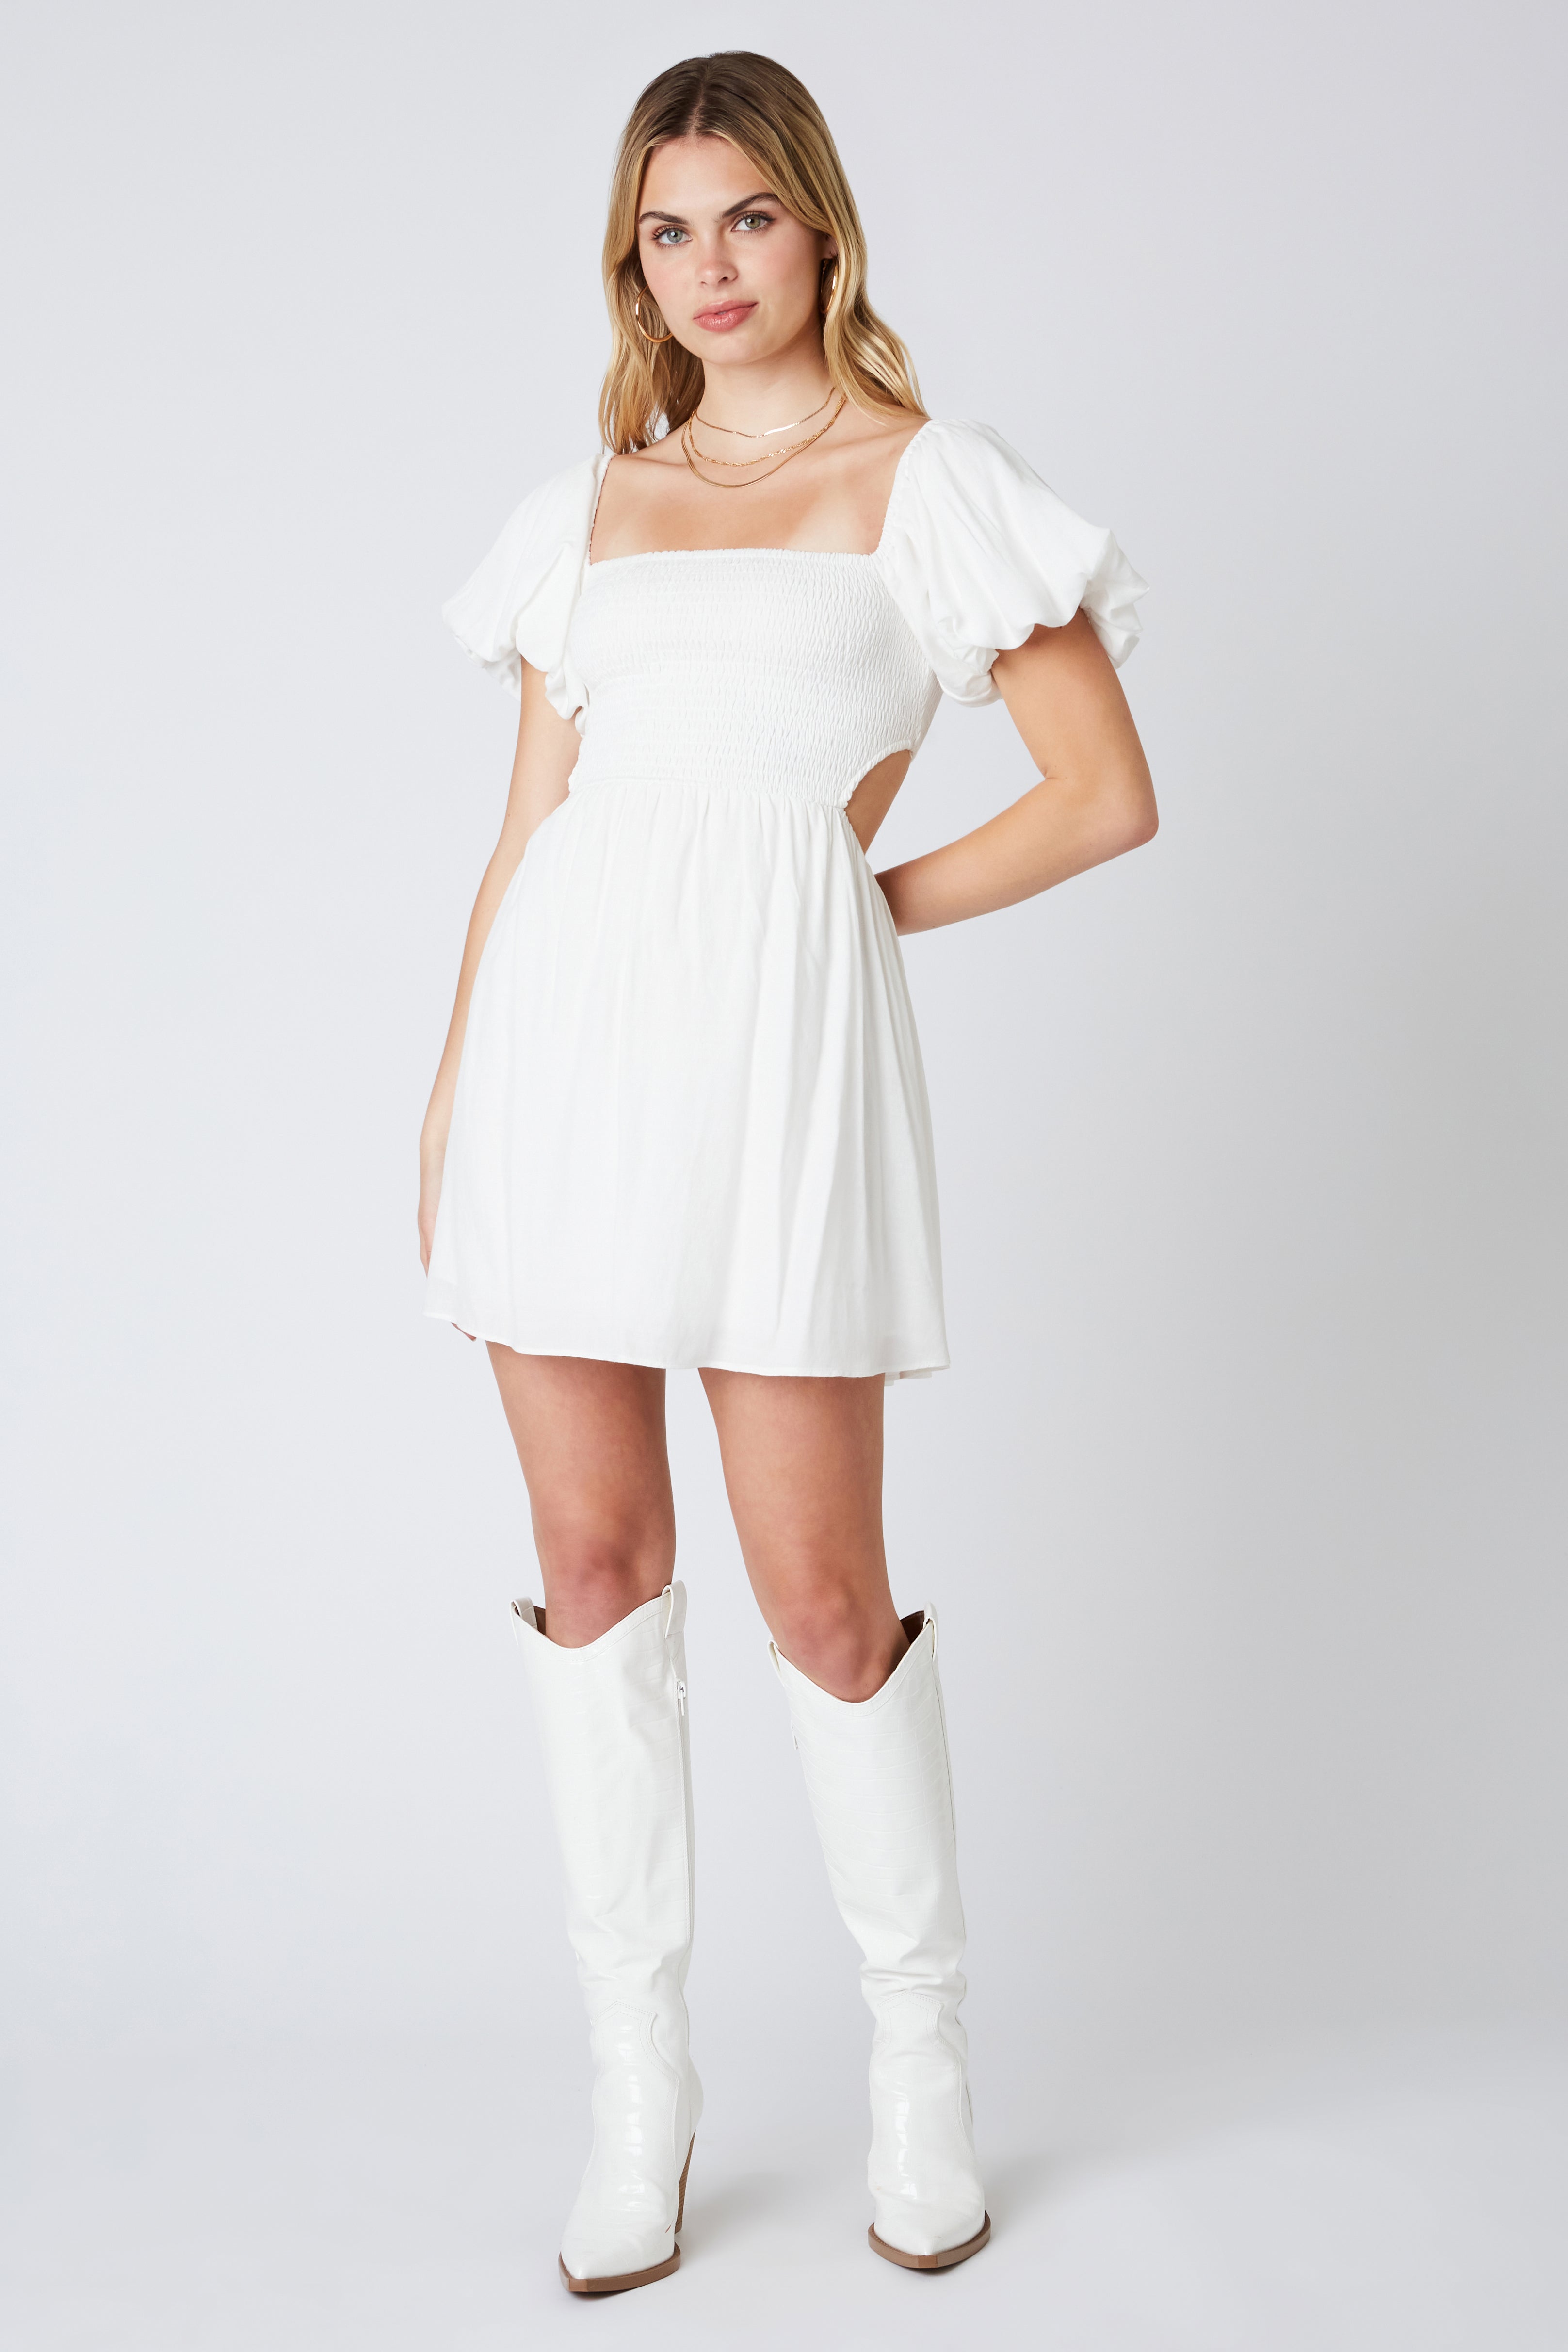 Smocked Babydoll Dress in White Front